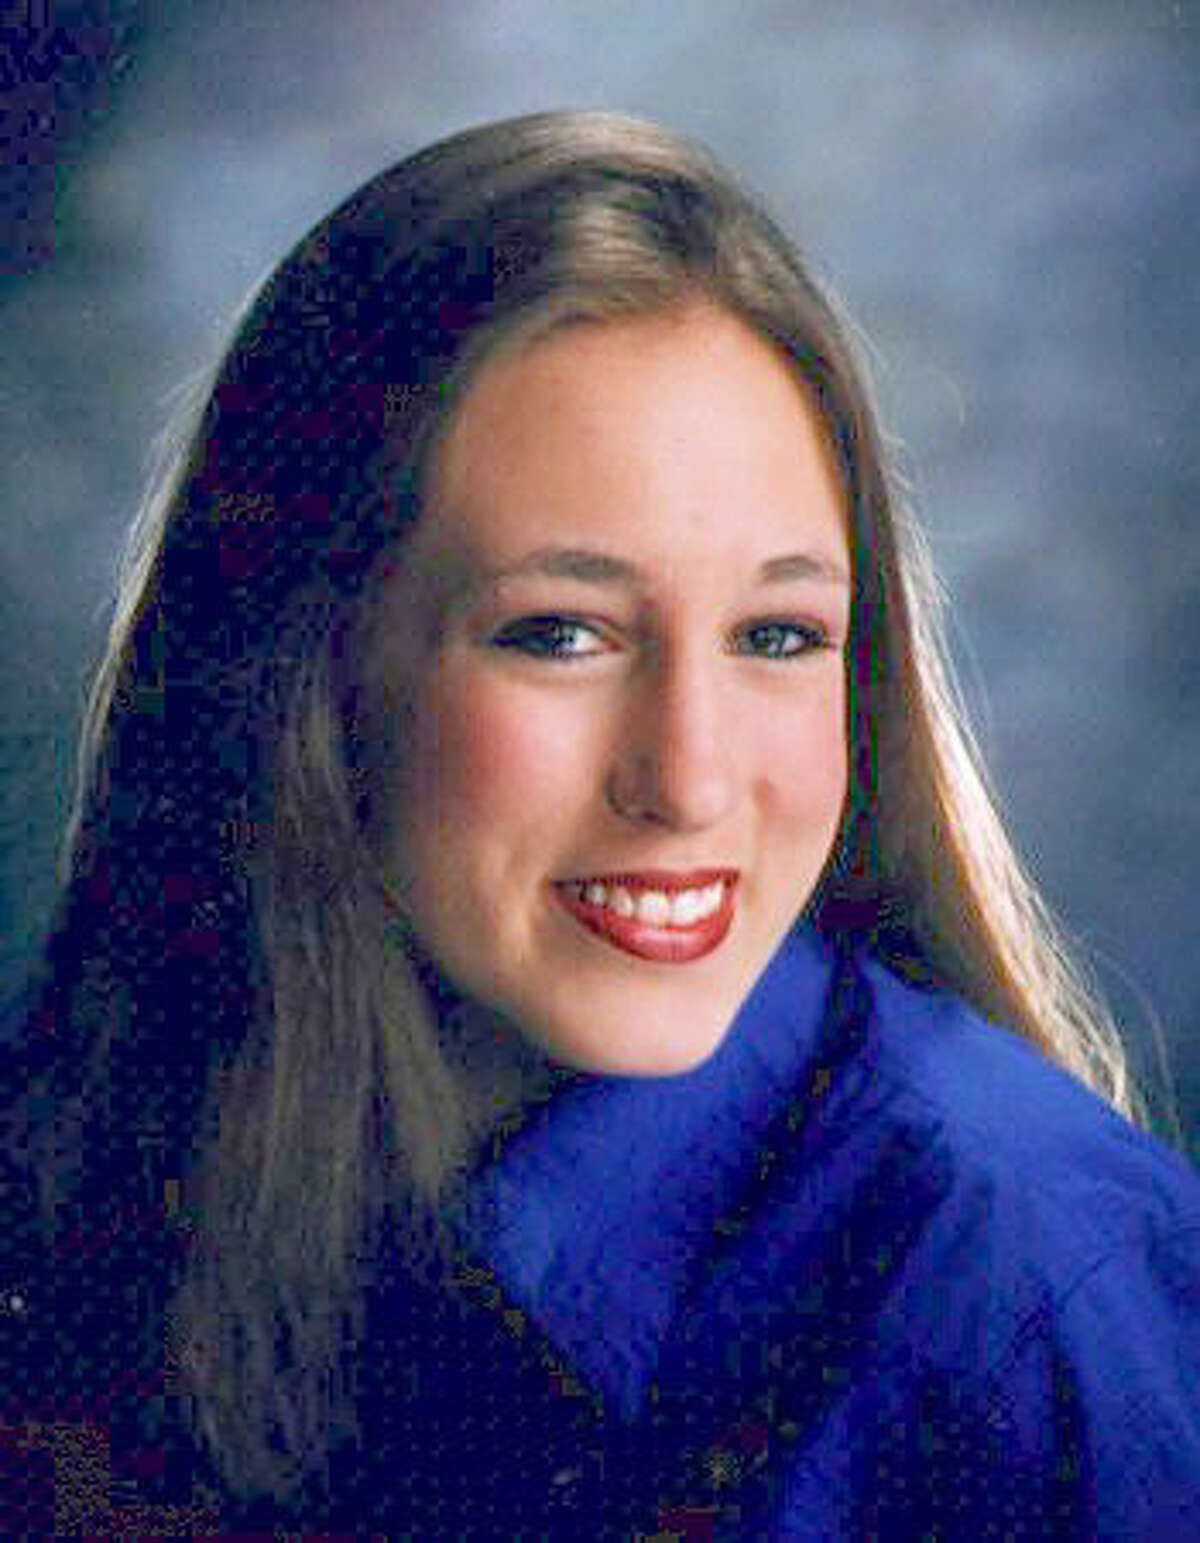 file photo from the internet- melissa trotter 19, was last seen december 8, 1998 around 2pm at montgomery county college. melissa is 5ft,4in tall, has hazel eyes and long brown hair. she weighs between 100 and 110 lbs. any info about melissa should call detective sargeant mock of the montgomery count sheriff's office at 409-760-5876, and refer to case number 98a017441. HOUCHRON CAPTION (12/12/1998)(12/23/1998)(01/03.1999)(01/27/1999): Melissa Trotter. HOUCHRON CAPTION (12/16/1998)(01/04/1999)(01/24/1999): Trotter. HOUCHRON CAPTION (05/15/2000): Nineteen-year-old Melissa Trotter was strangled after disappearing on Dec. 8, 1998. HOUCHRON CAPTION (06/29/2000) (07/12/2000): Trotter.